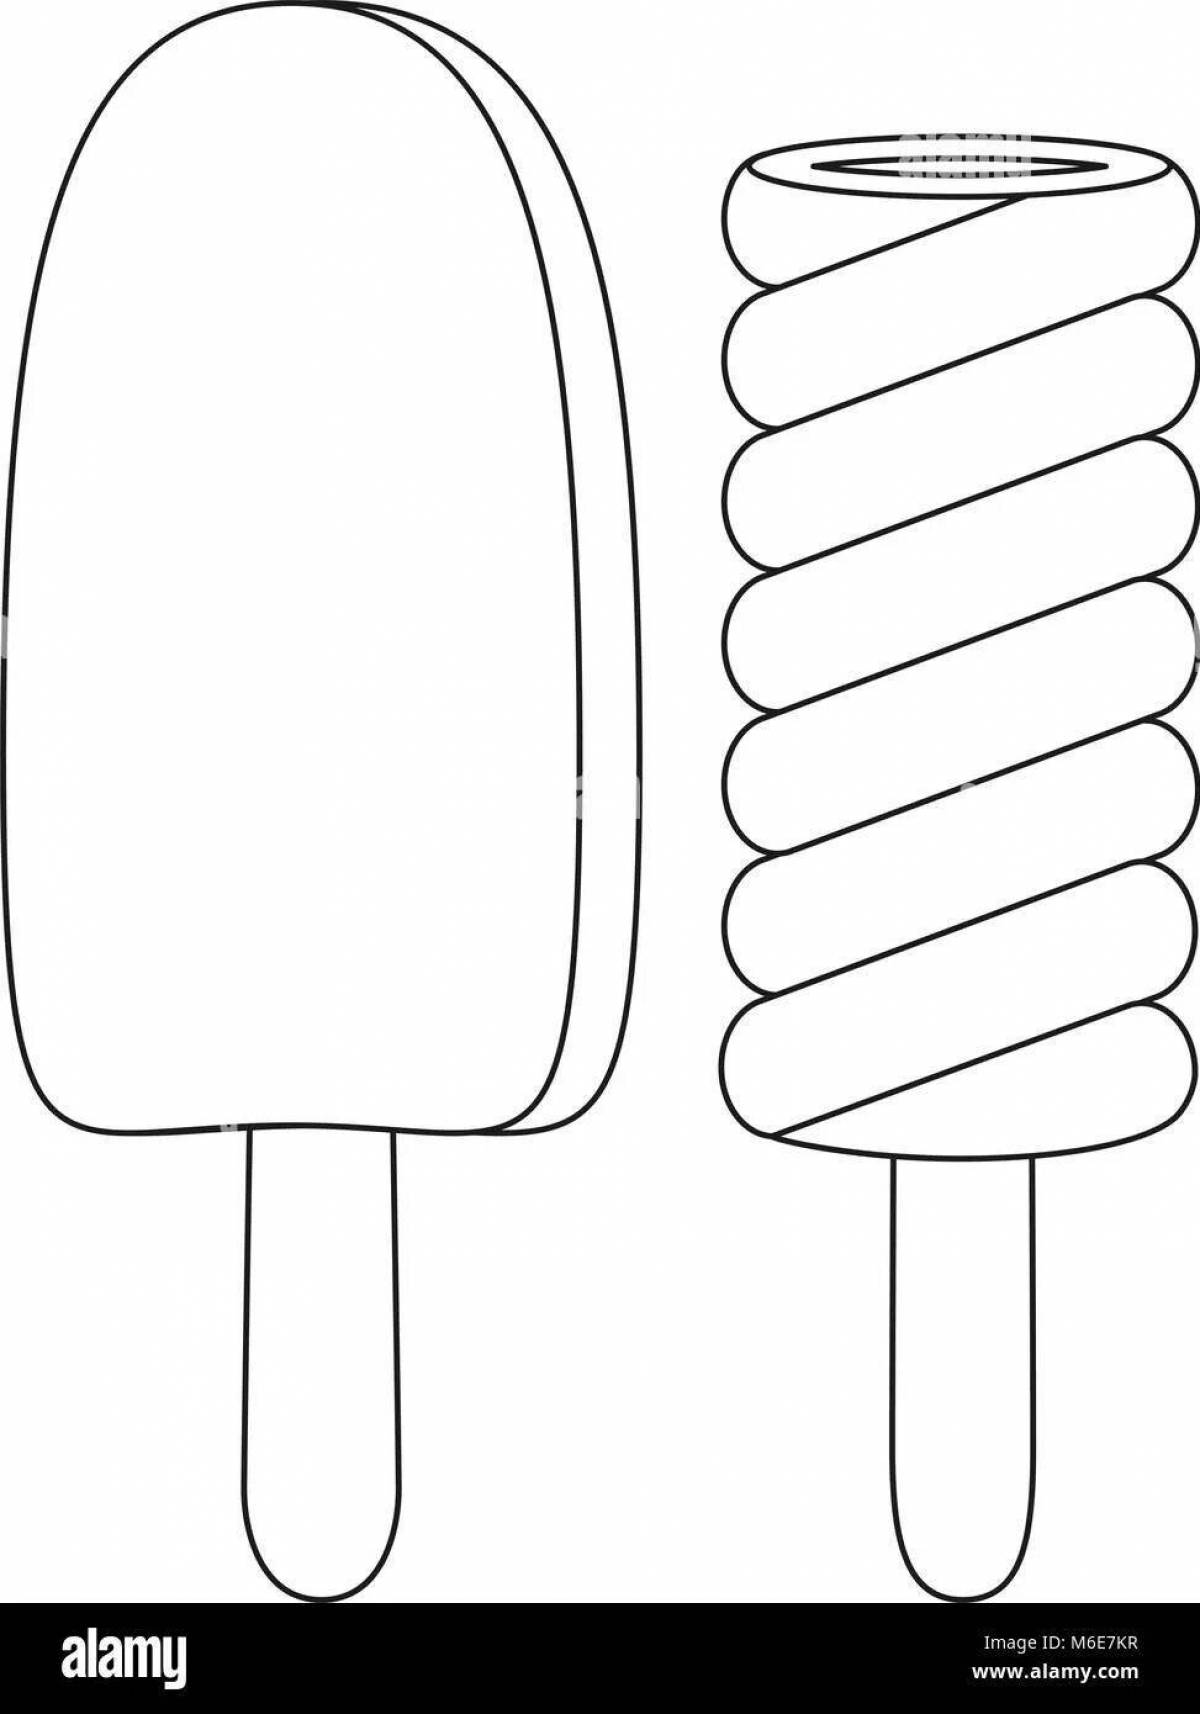 Calming popsicle coloring page